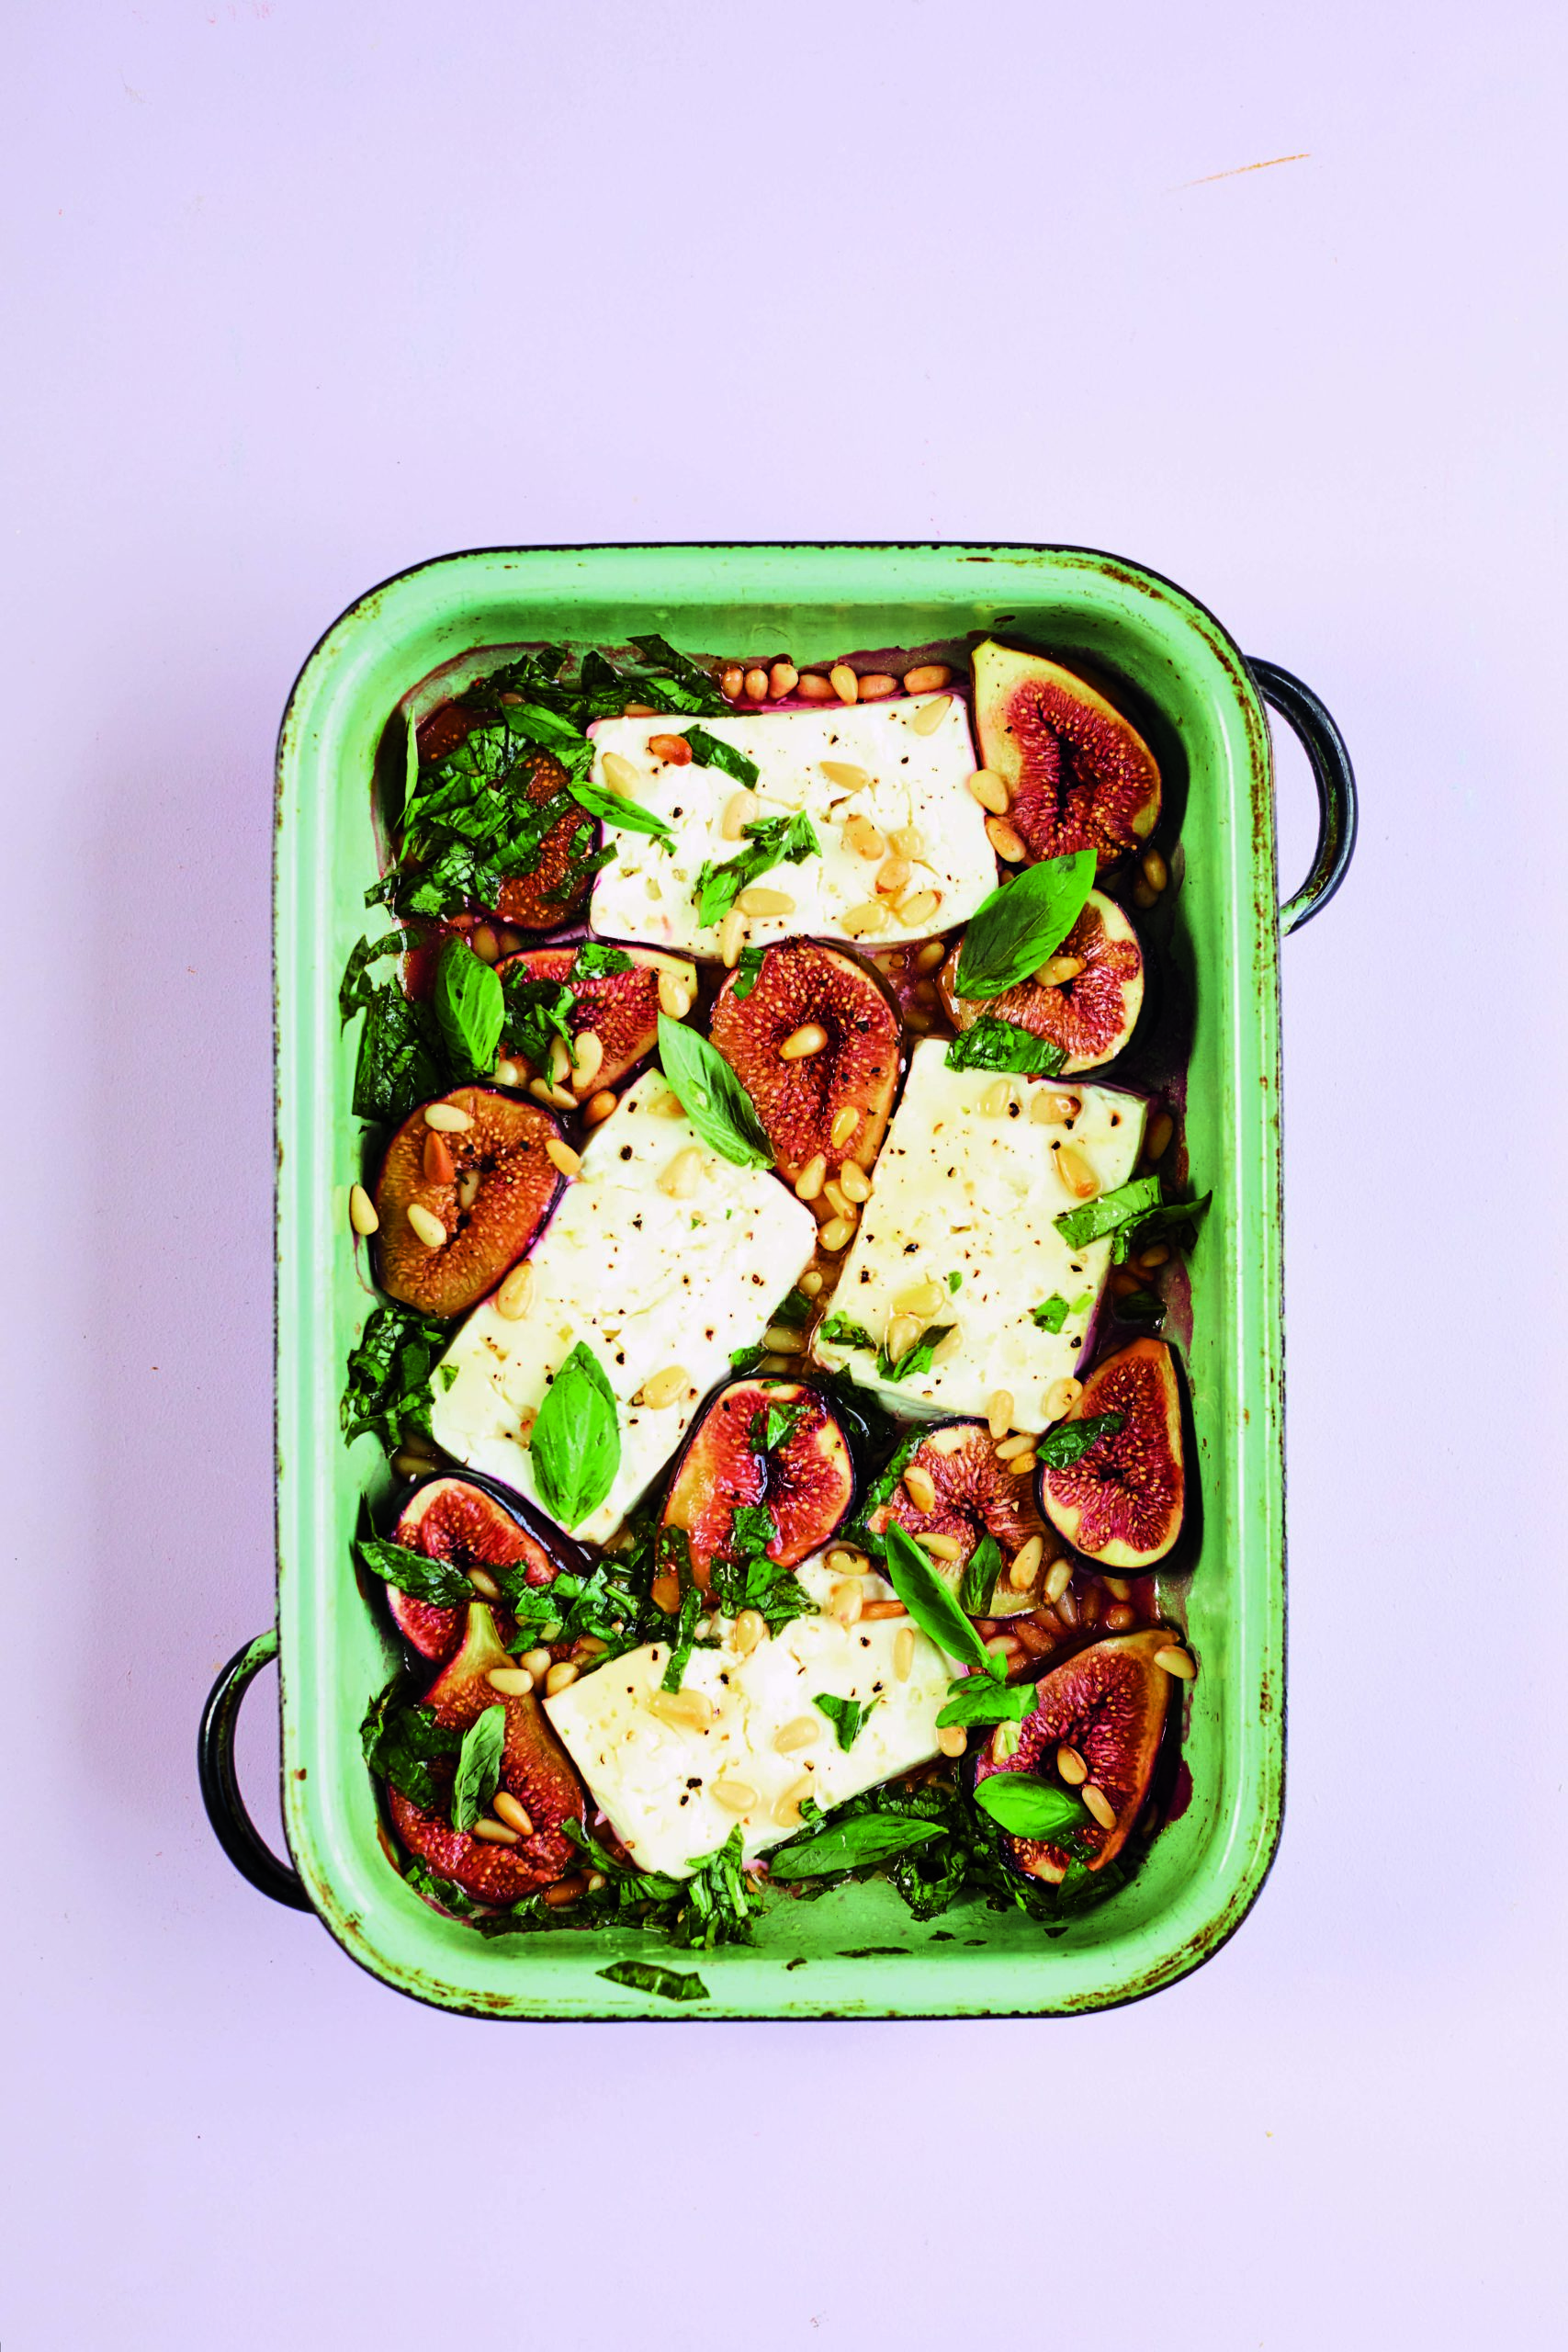 Baked Feta Cheese With Figs, Pine Nuts and Basil